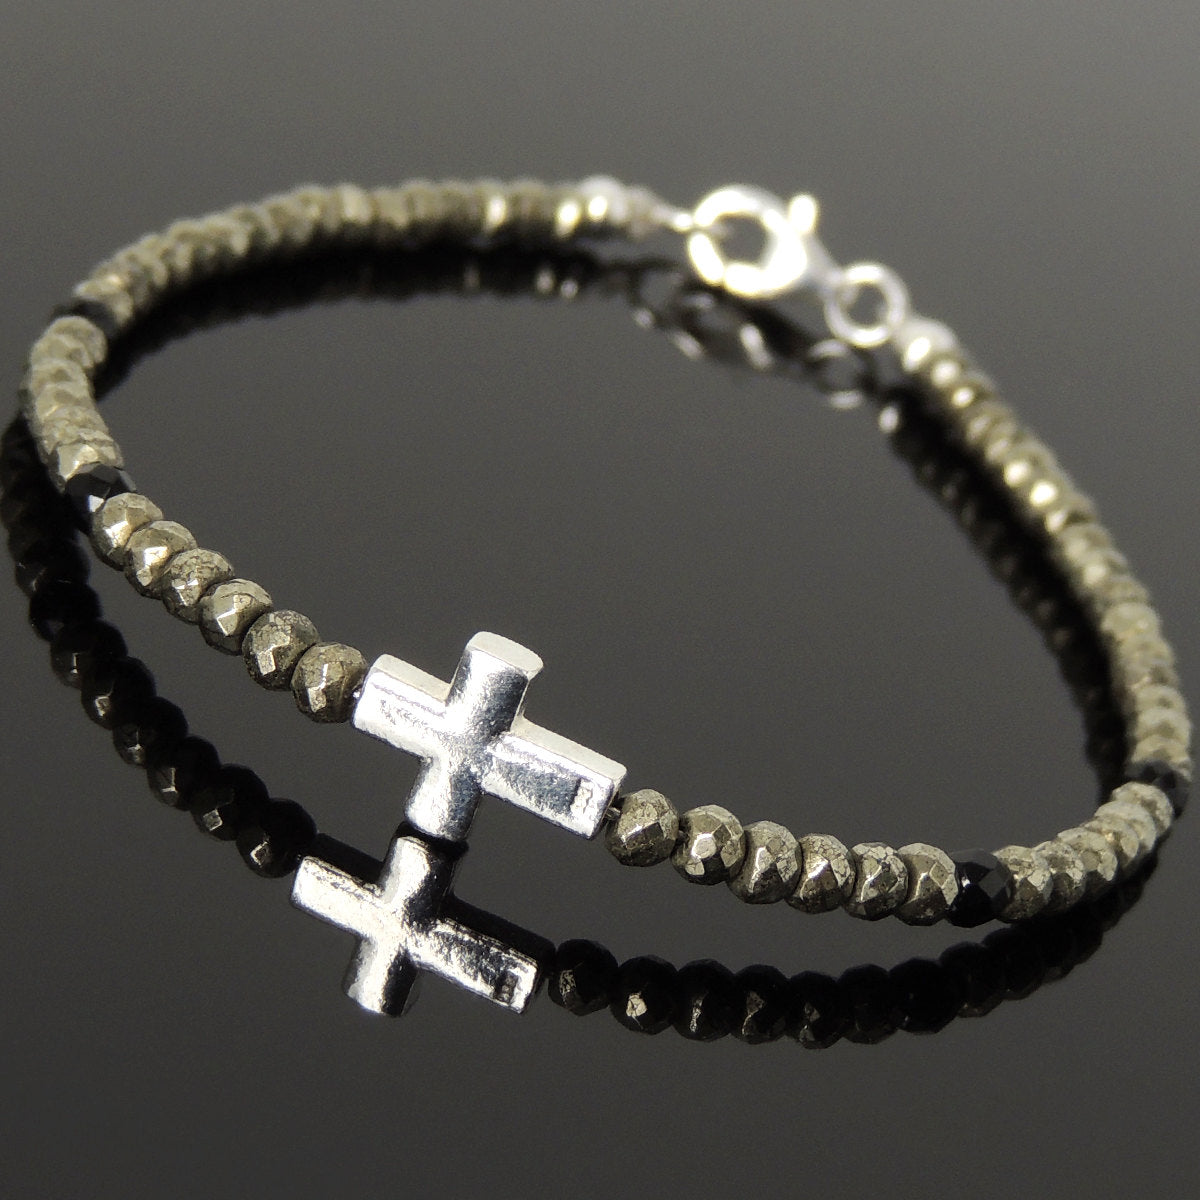 3mm Faceted Bright Black Onyx & Gold Pyrite Healing Gemstone Bracelet with S925 Sterling Silver Protection Cross Charm & Clasp - Handmade by Gem & Silver BR1078